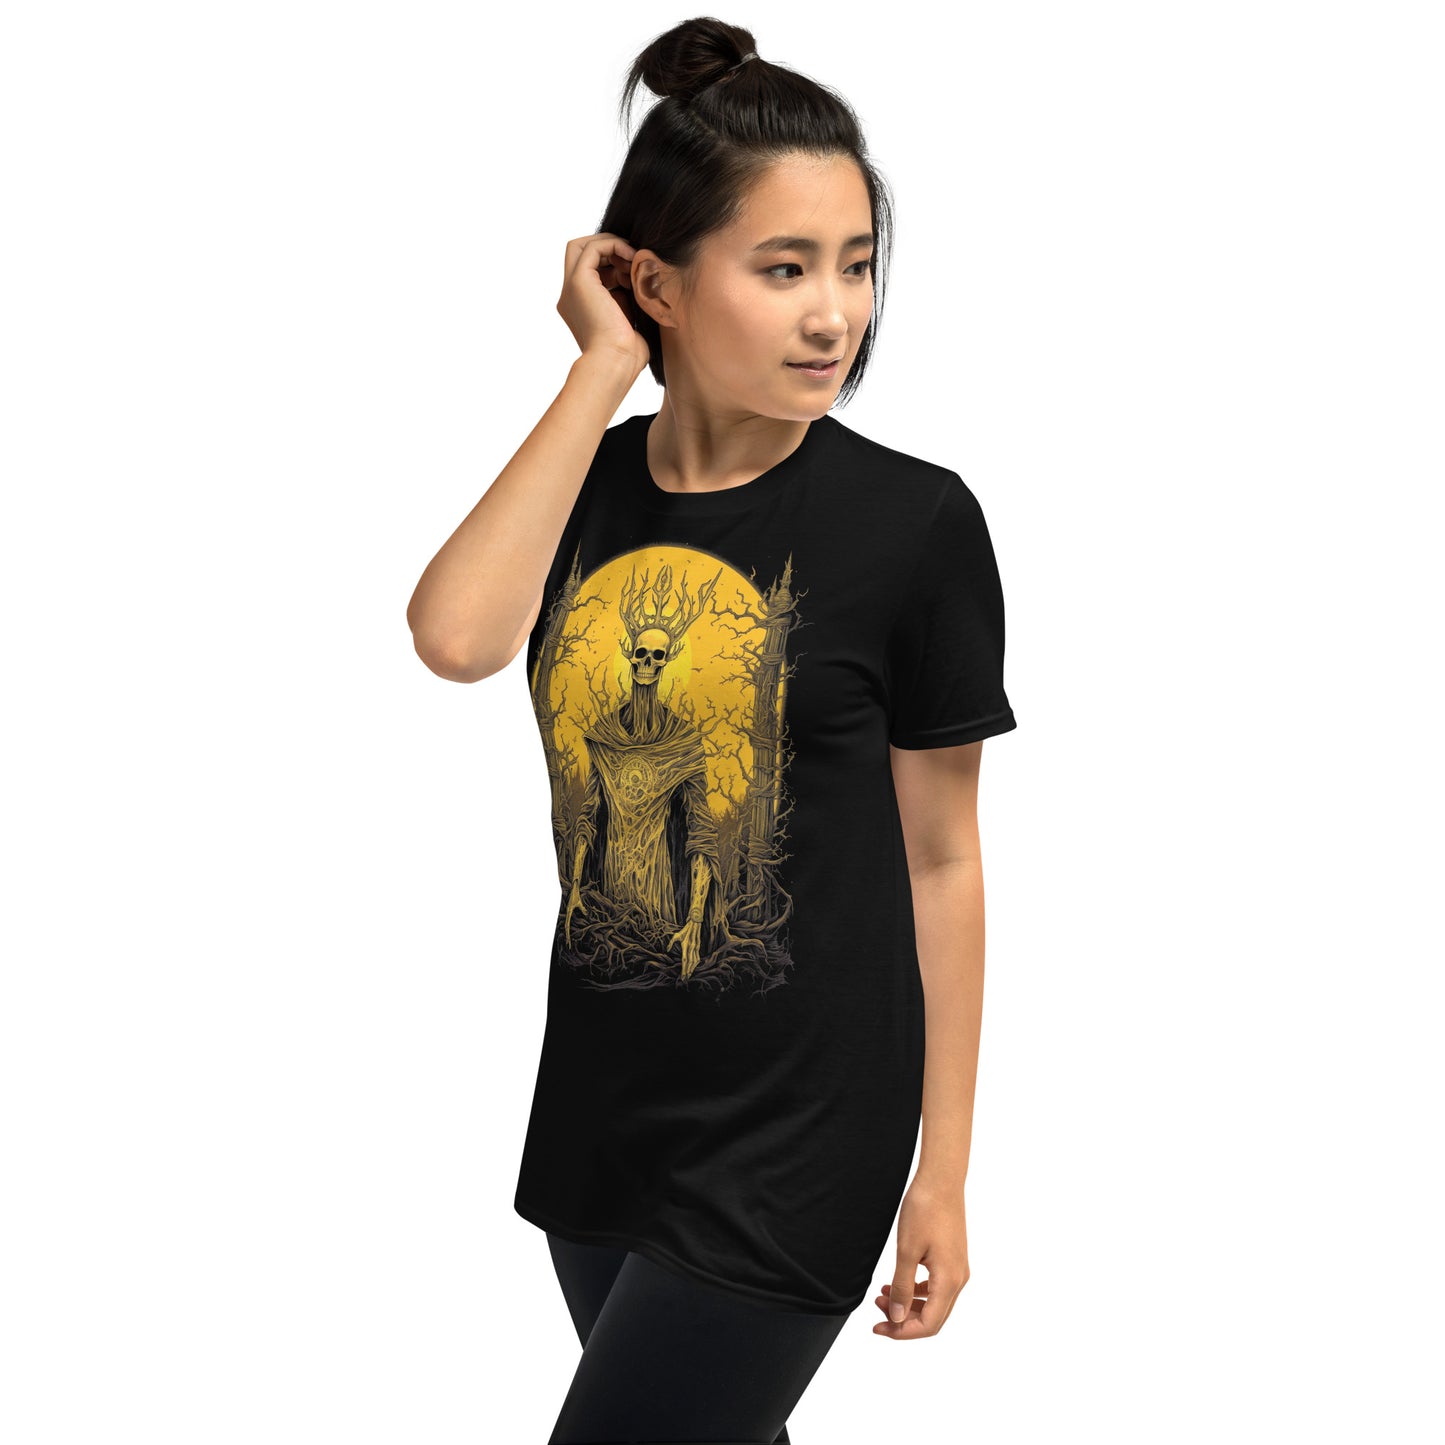 The King In Yellow Skull and Branches T-Shirt